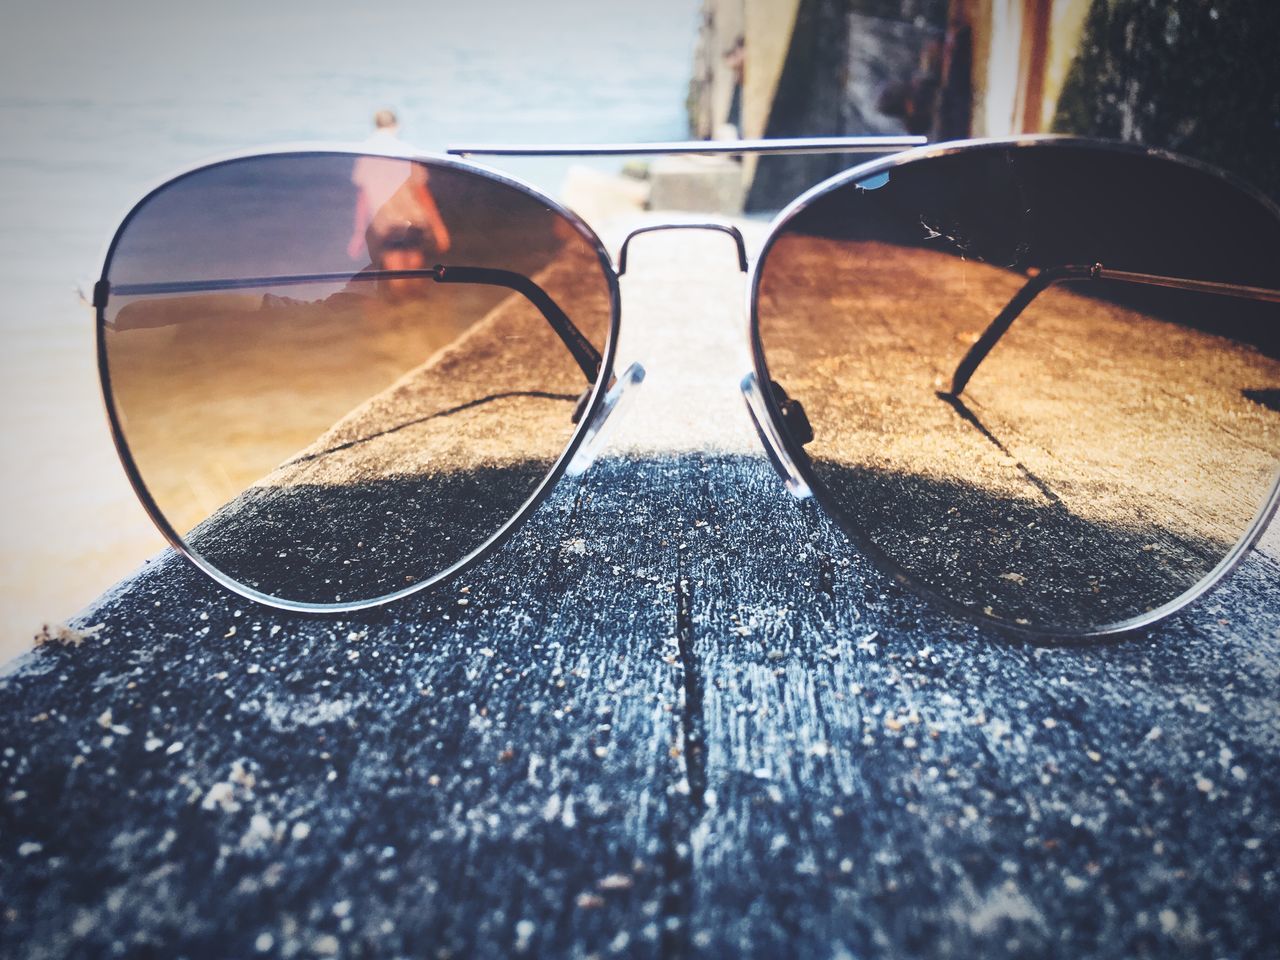 glasses, sunglasses, reflection, glass - material, fashion, personal accessory, close-up, day, selective focus, transparent, still life, eyeglasses, no people, table, outdoors, security, protection, wood - material, nature, focus on foreground, surface level, eyewear